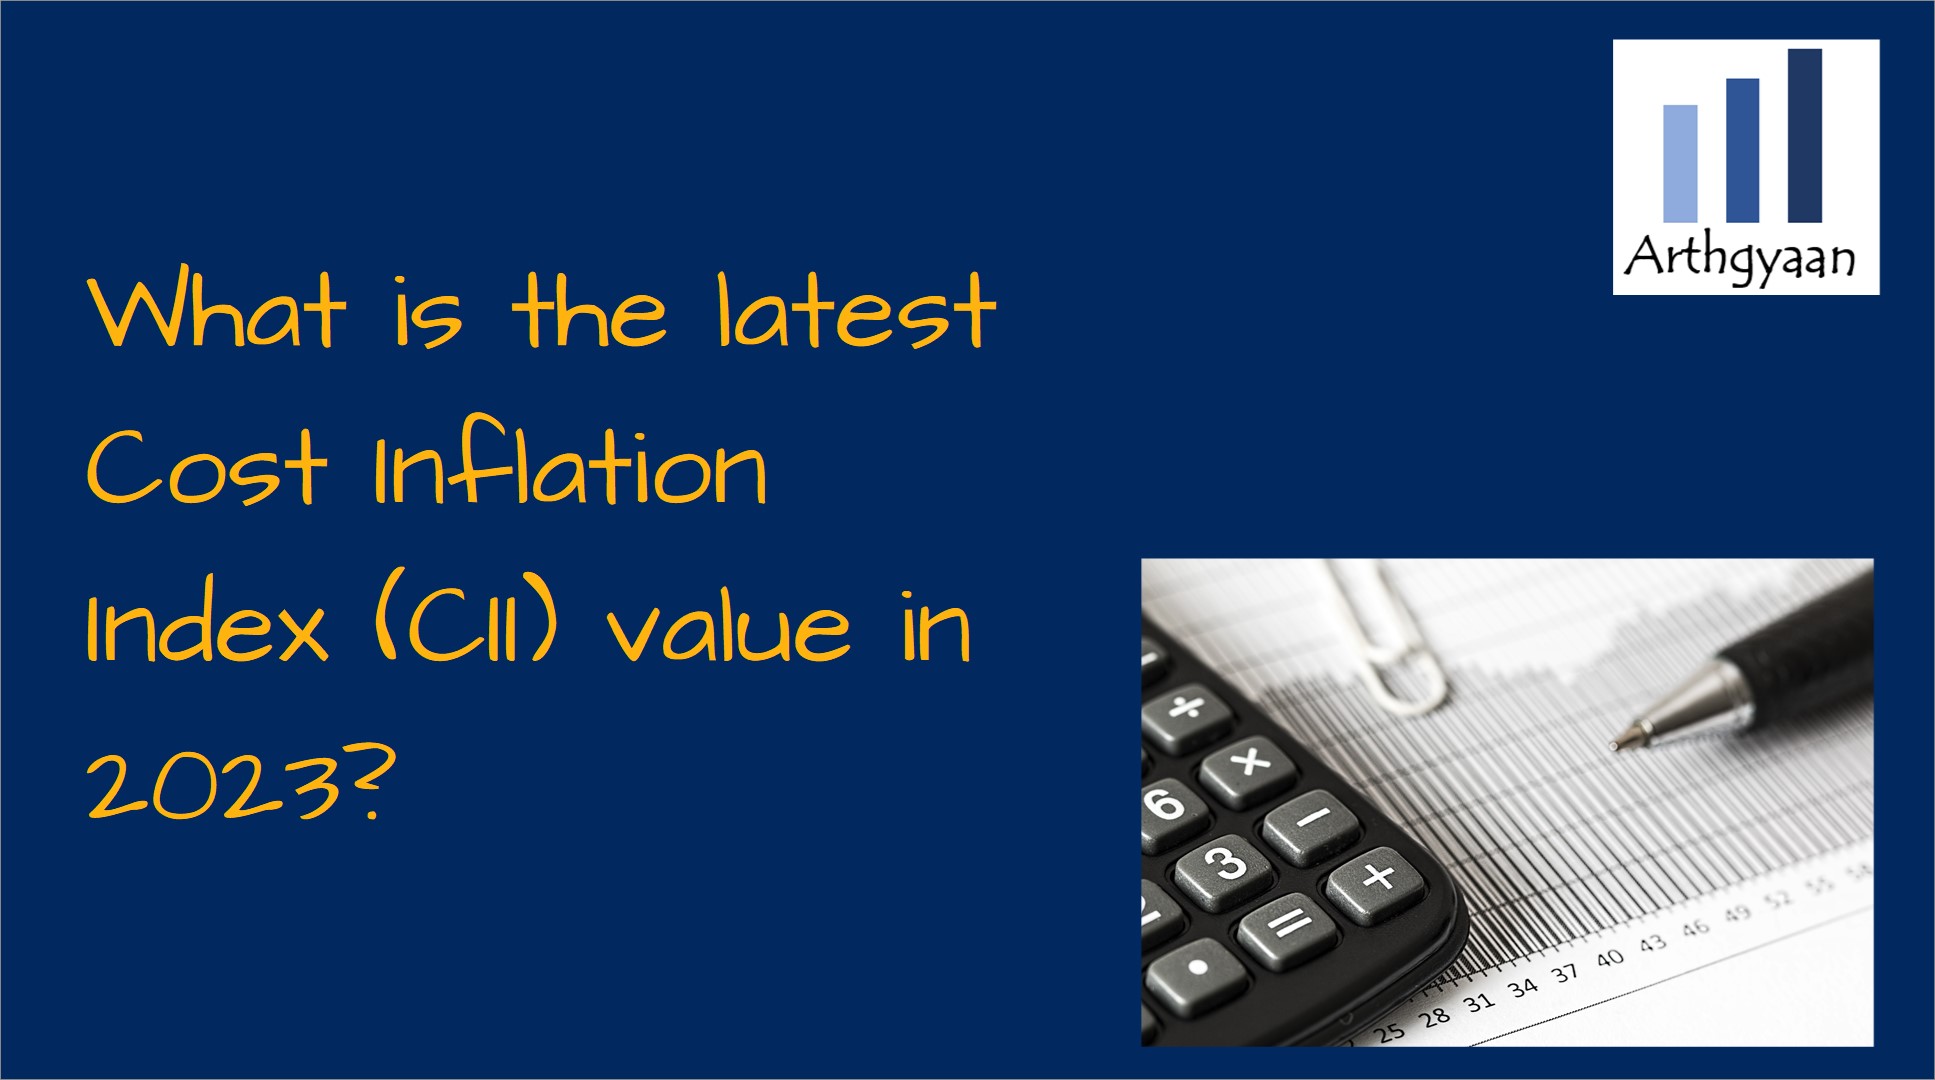 What is the latest Cost Inflation Index (CII) value in 2023?